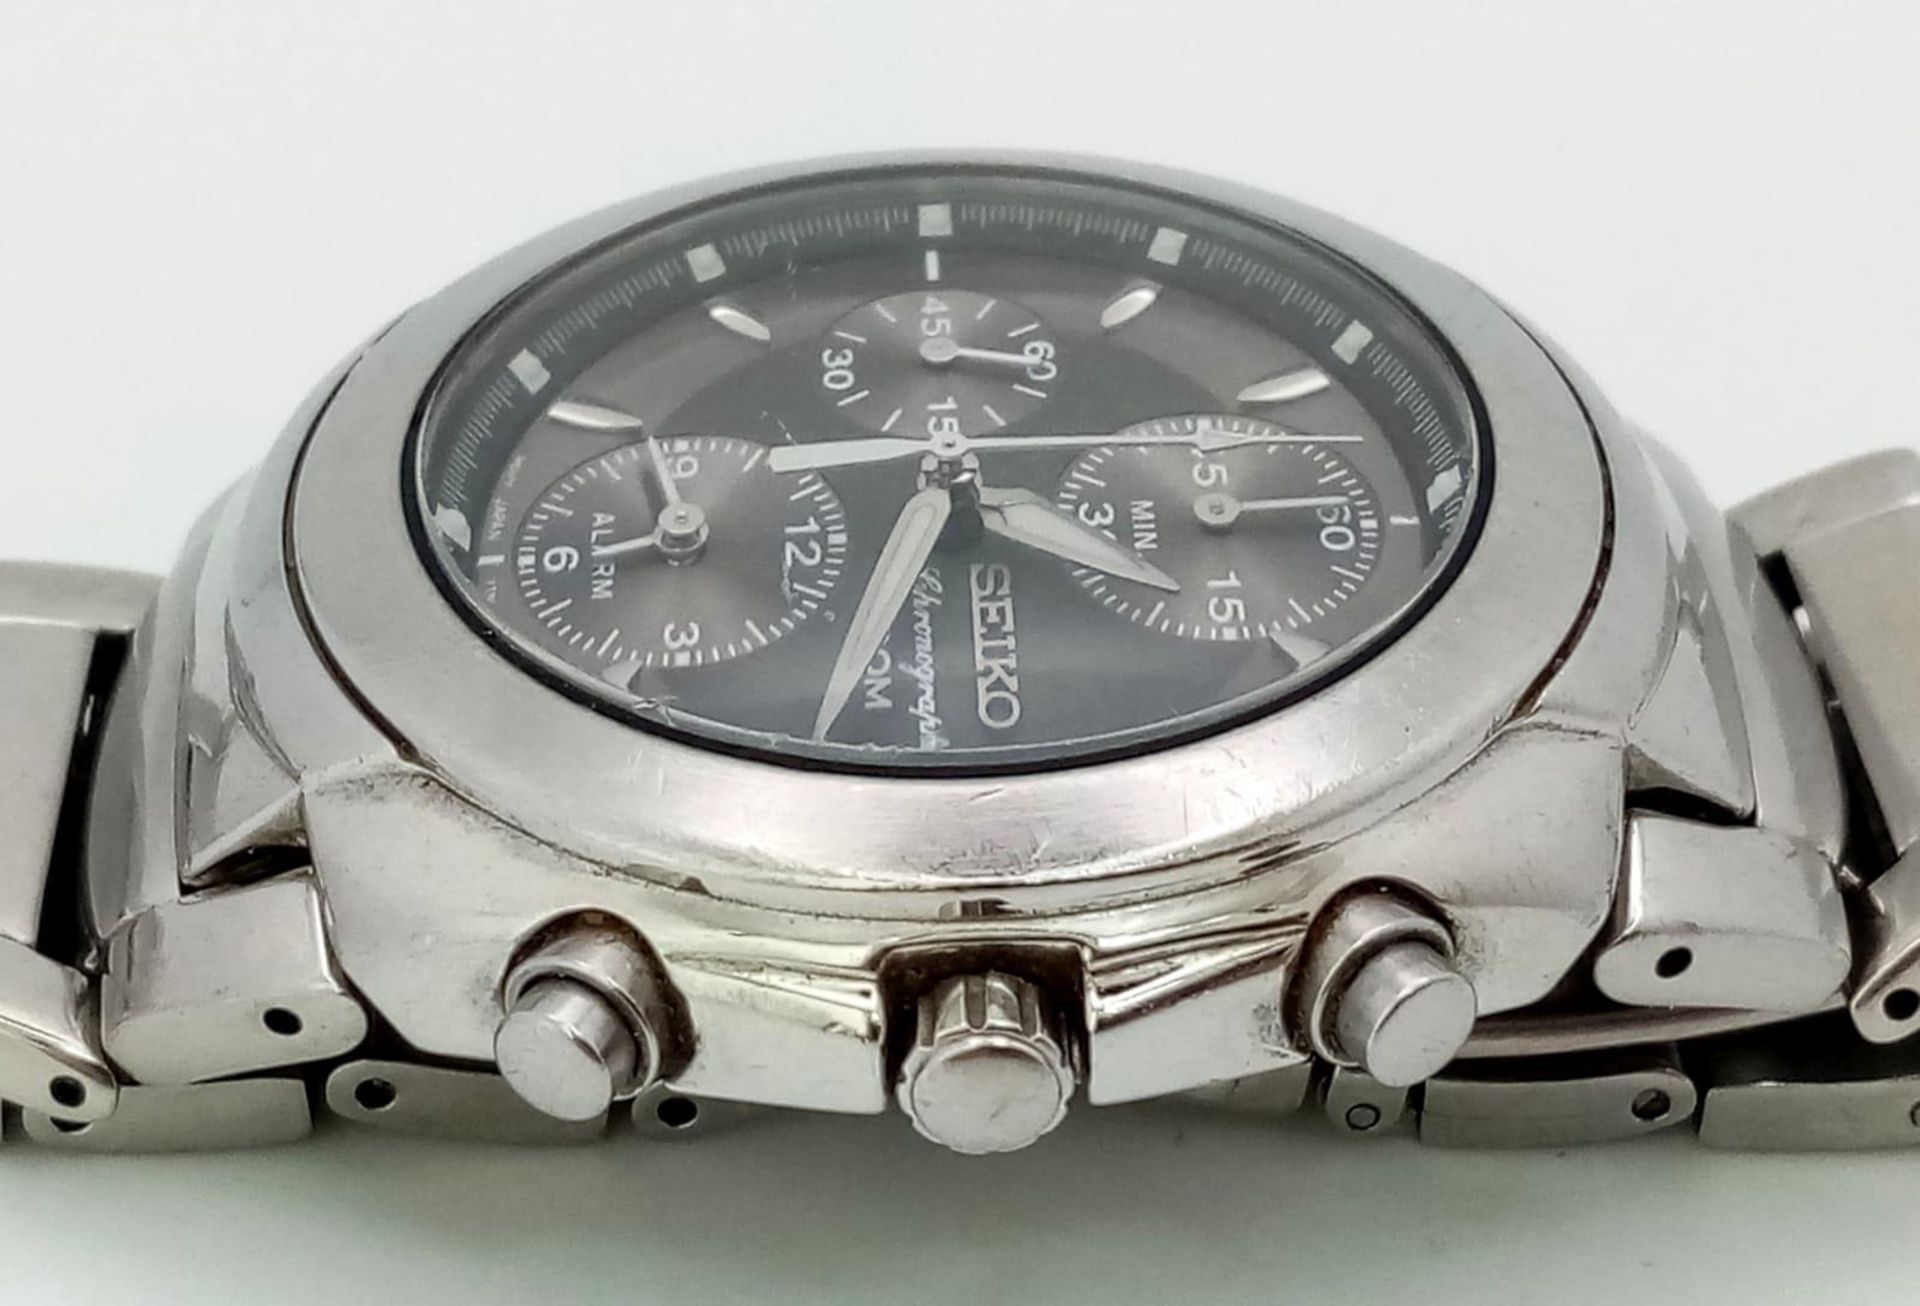 A Seiko Chronograph Quartz Gens Watch. Stainless steel strap and case - 40mm. Silver tone dial - Image 7 of 13